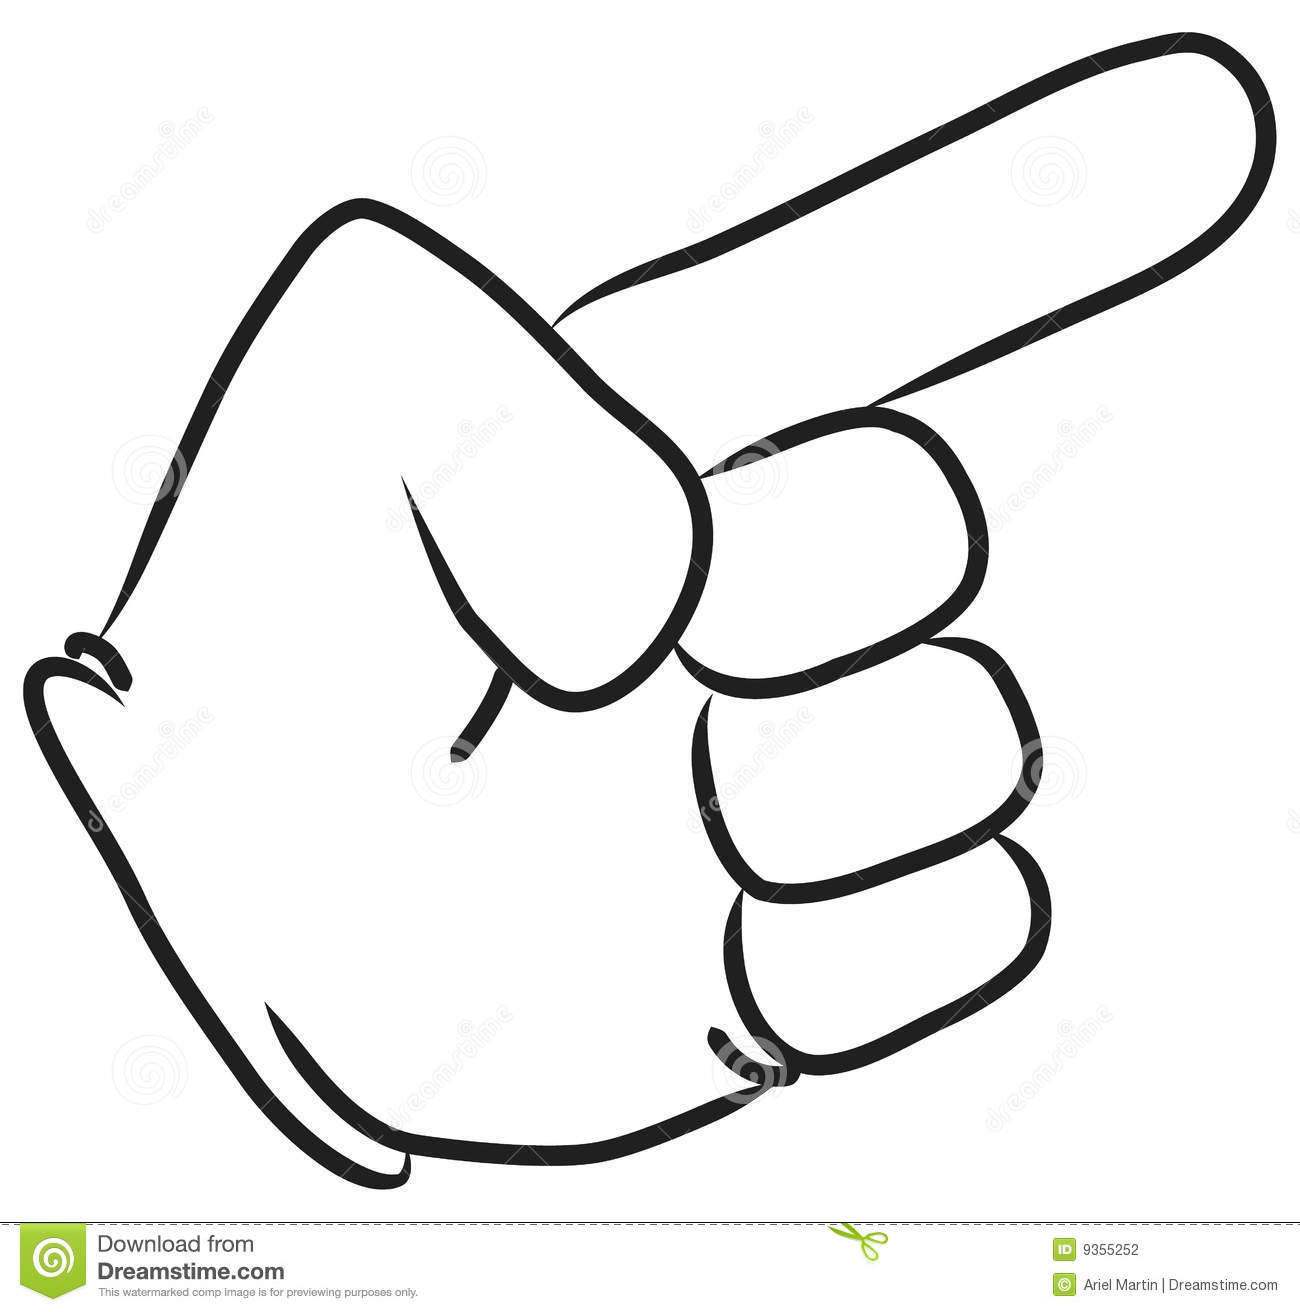 Cartoon Hand Pointing With The Index Finger  Outline In Black  Vector 